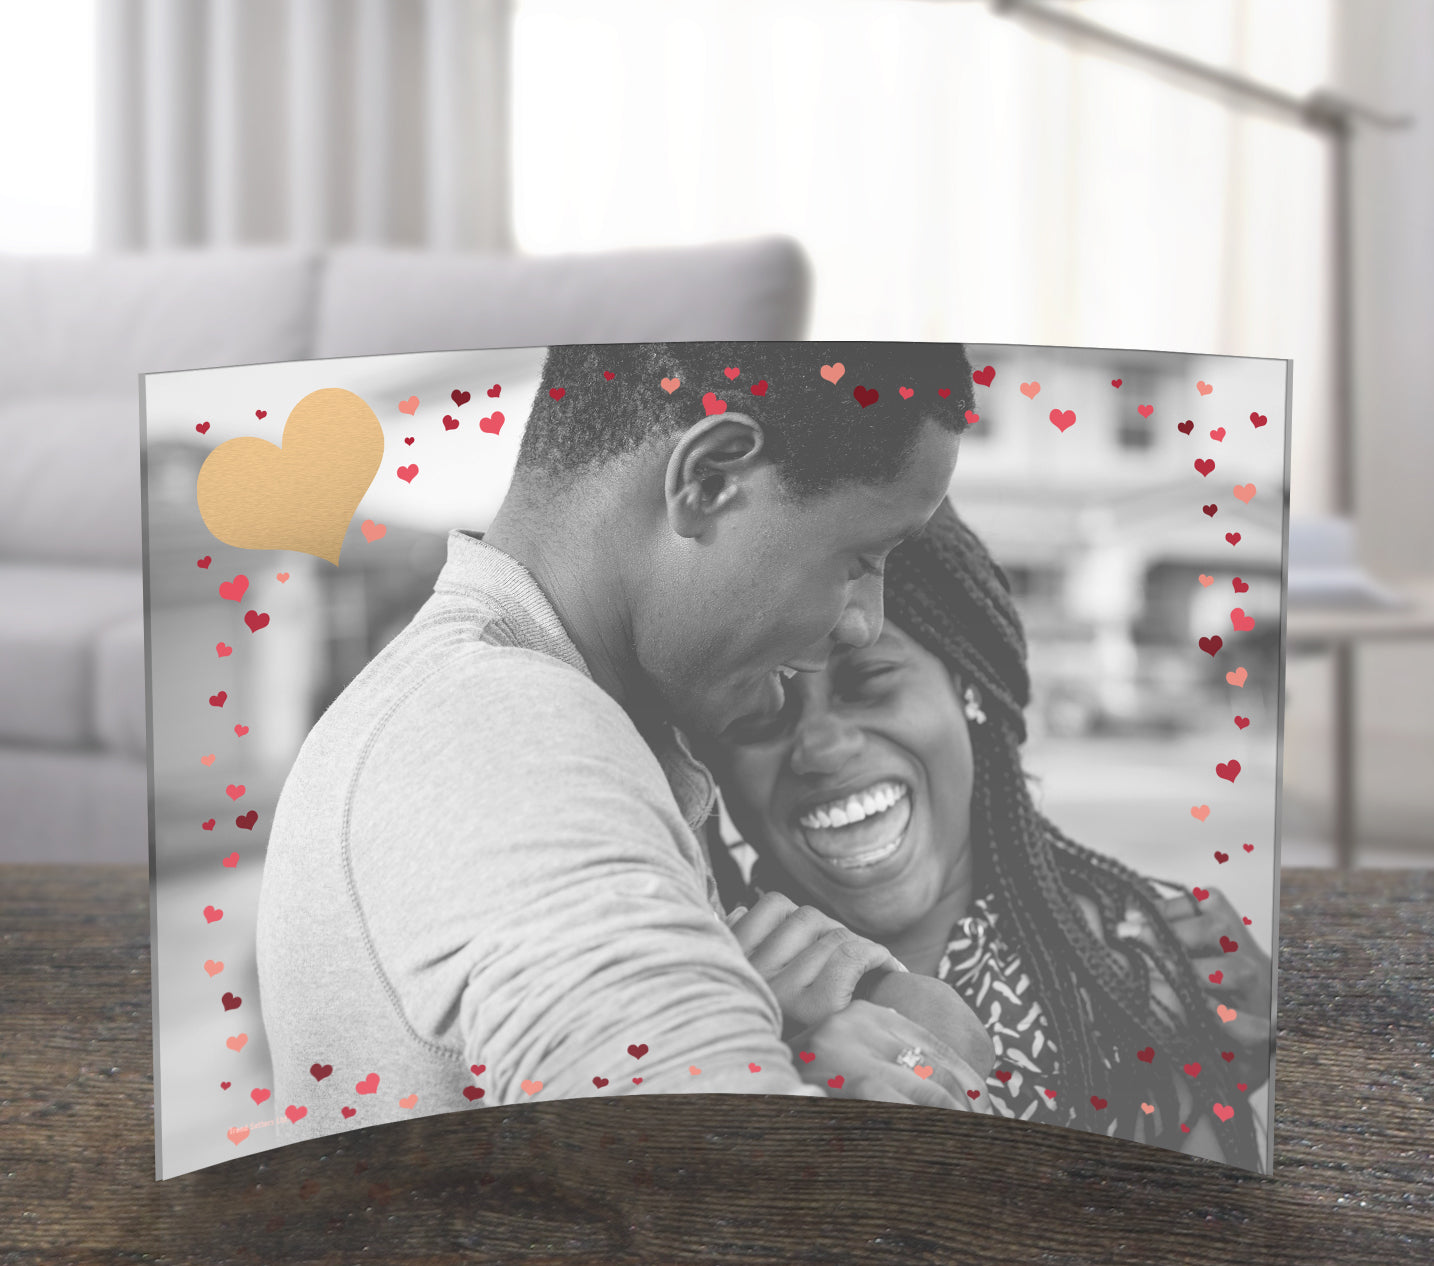 Valentine's Day (Golden Heart - Personalized)  7" x 5" Curved Acrylic Print